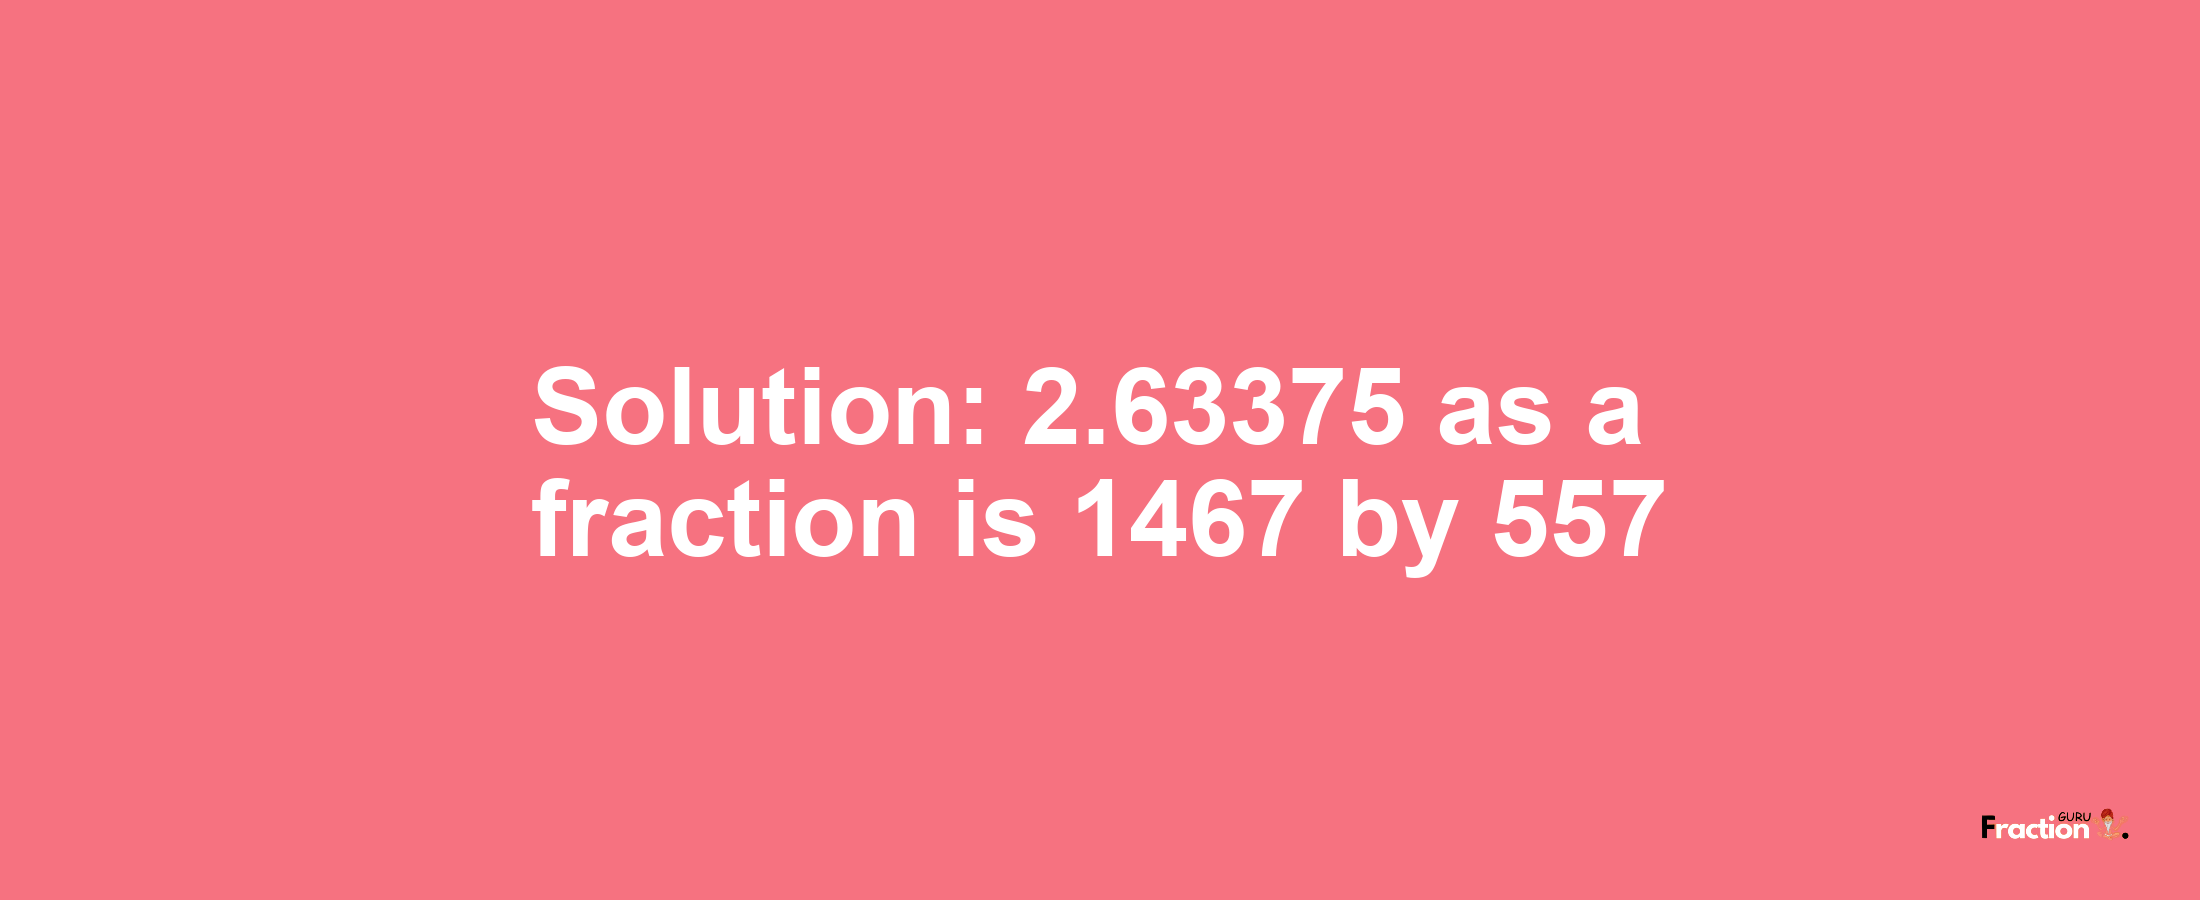 Solution:2.63375 as a fraction is 1467/557